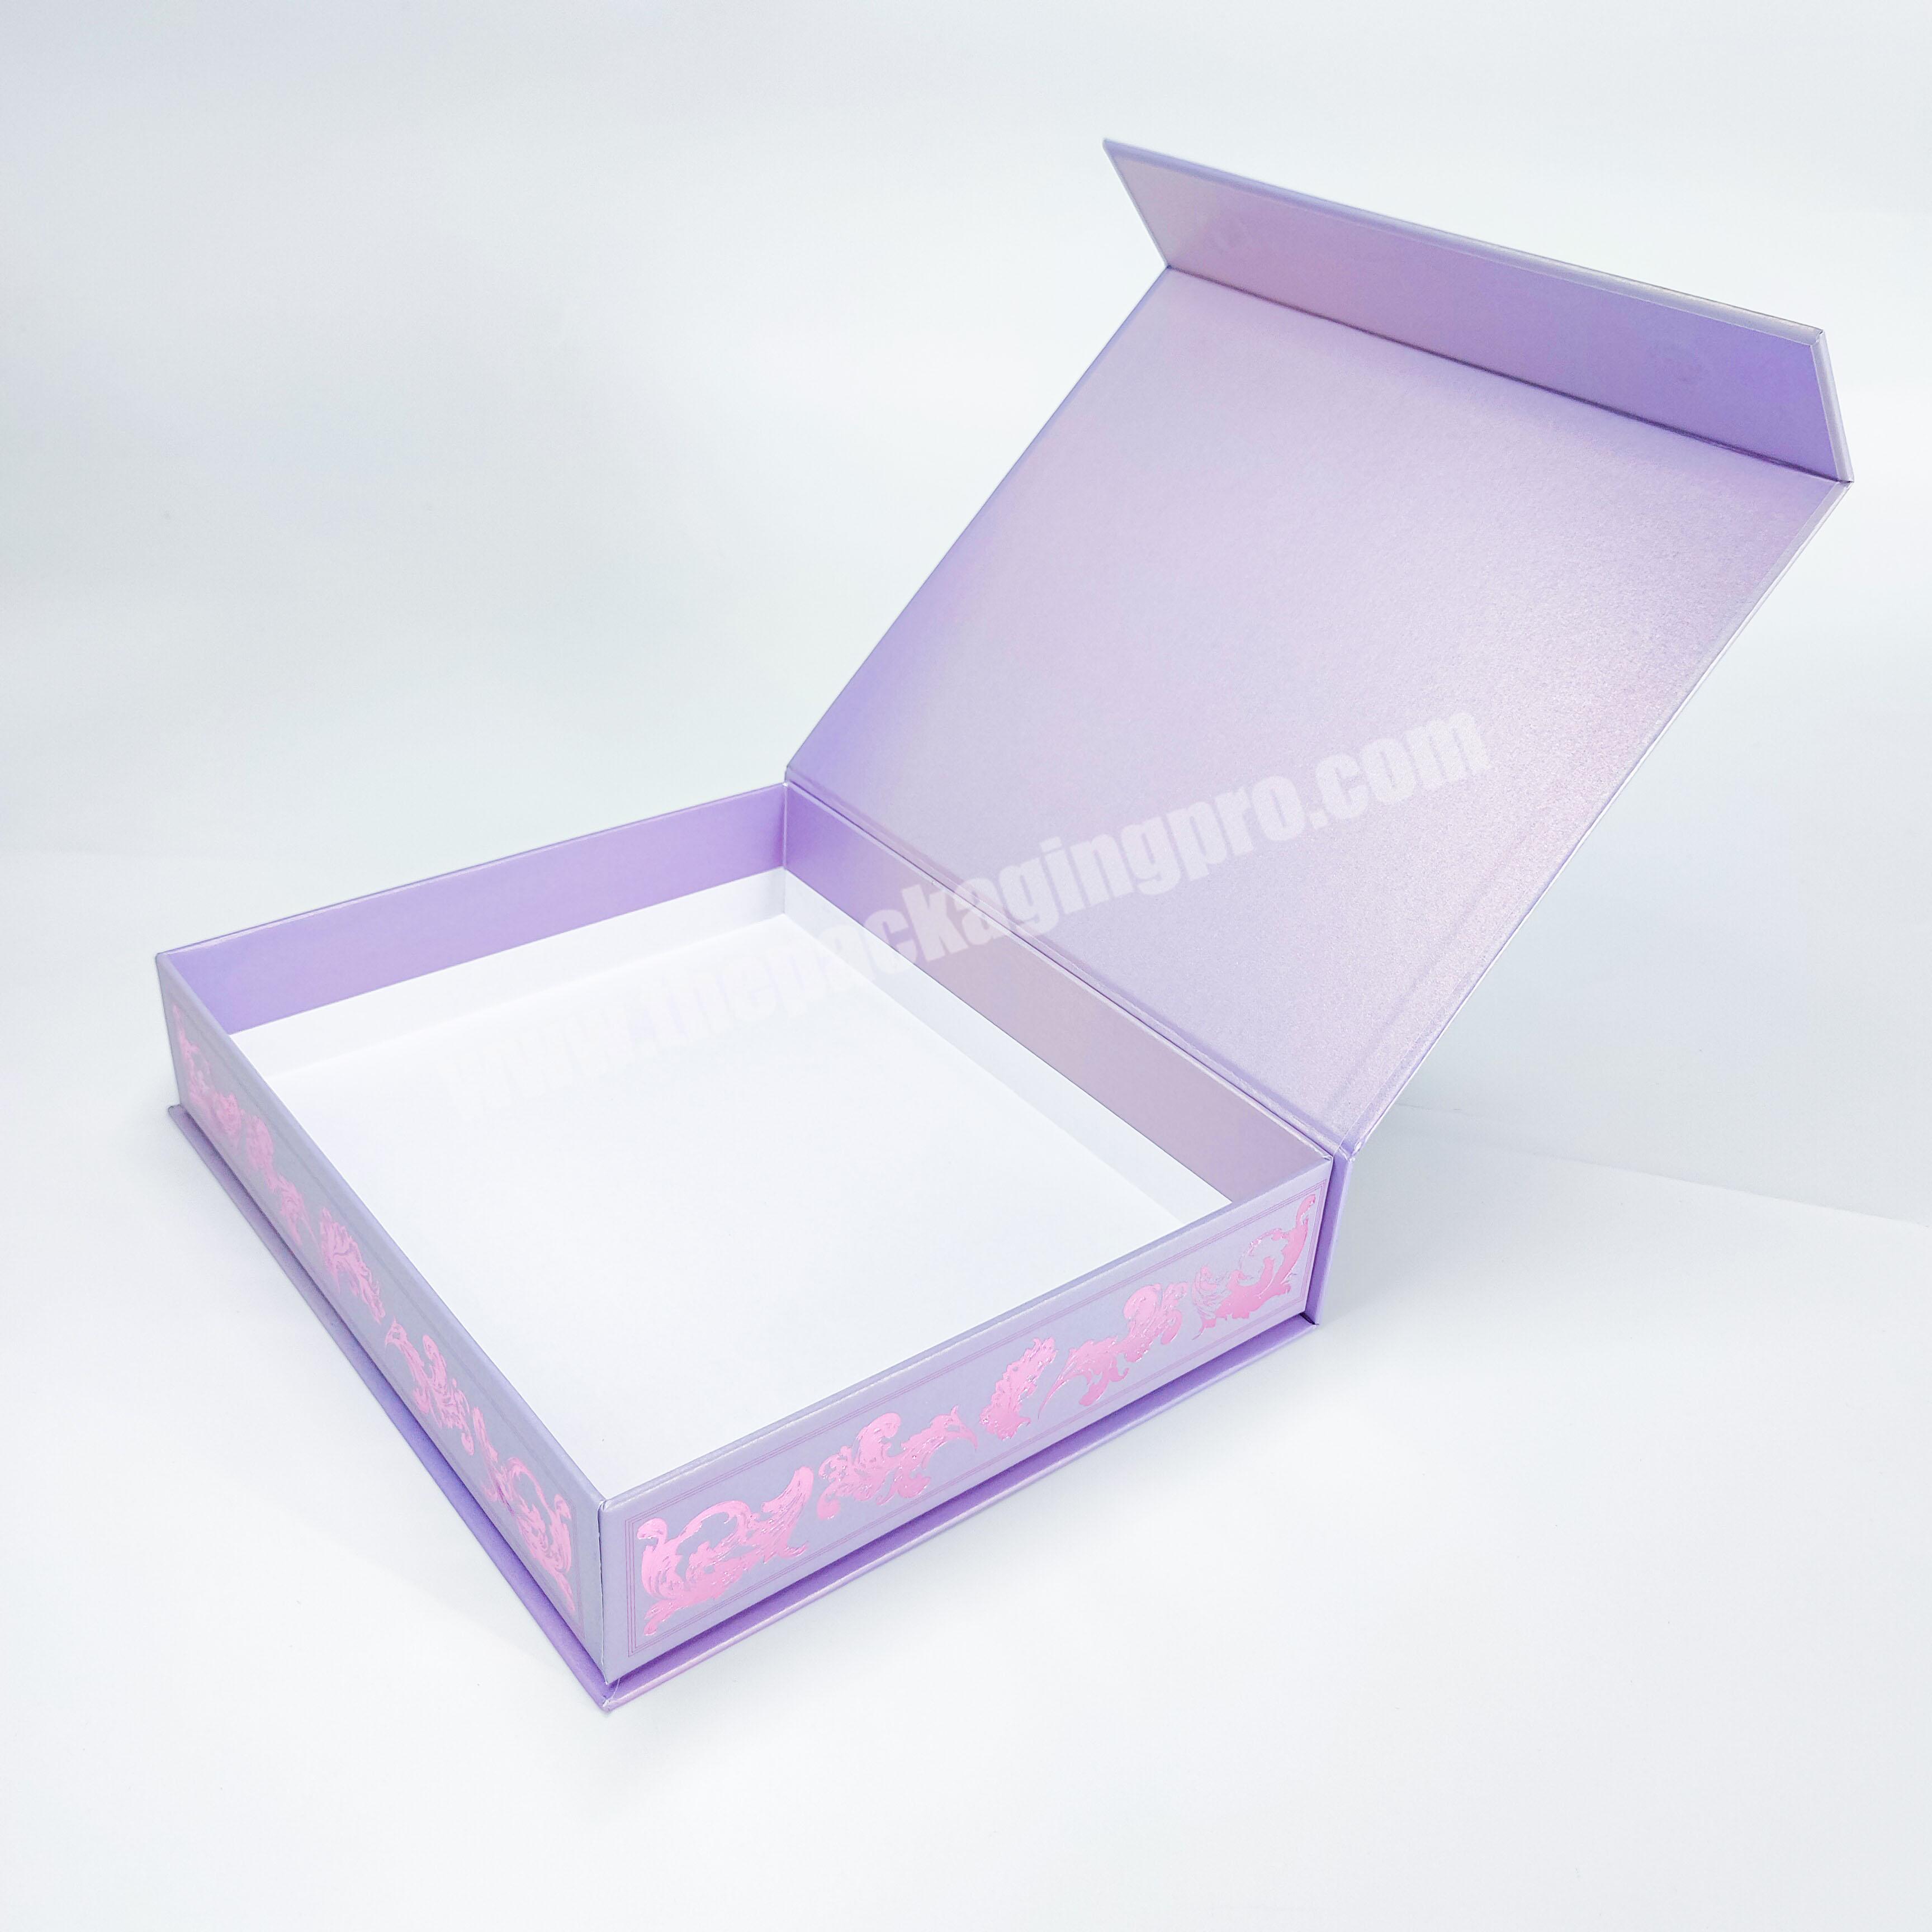 Factory direct high quality paper box with lid template